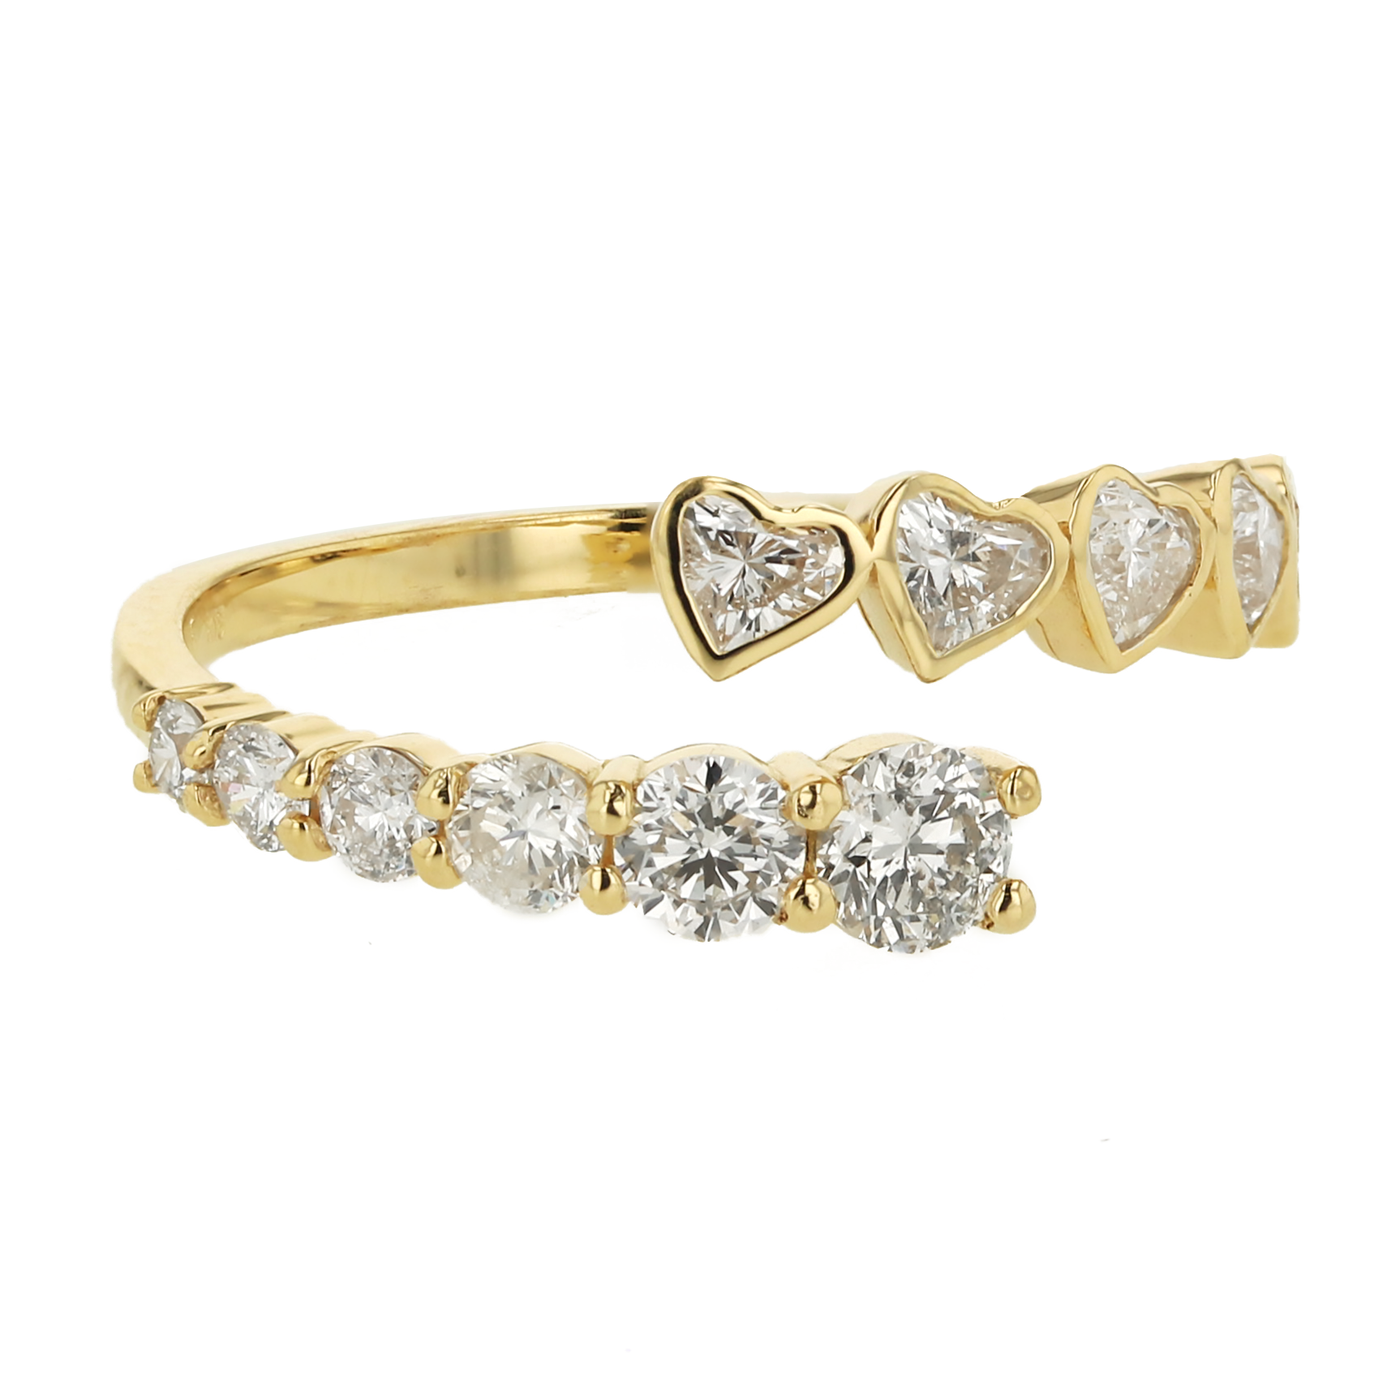 0.92 CTTW Heart & Round Diamond Wrap Ring in 14K Yellow Gold